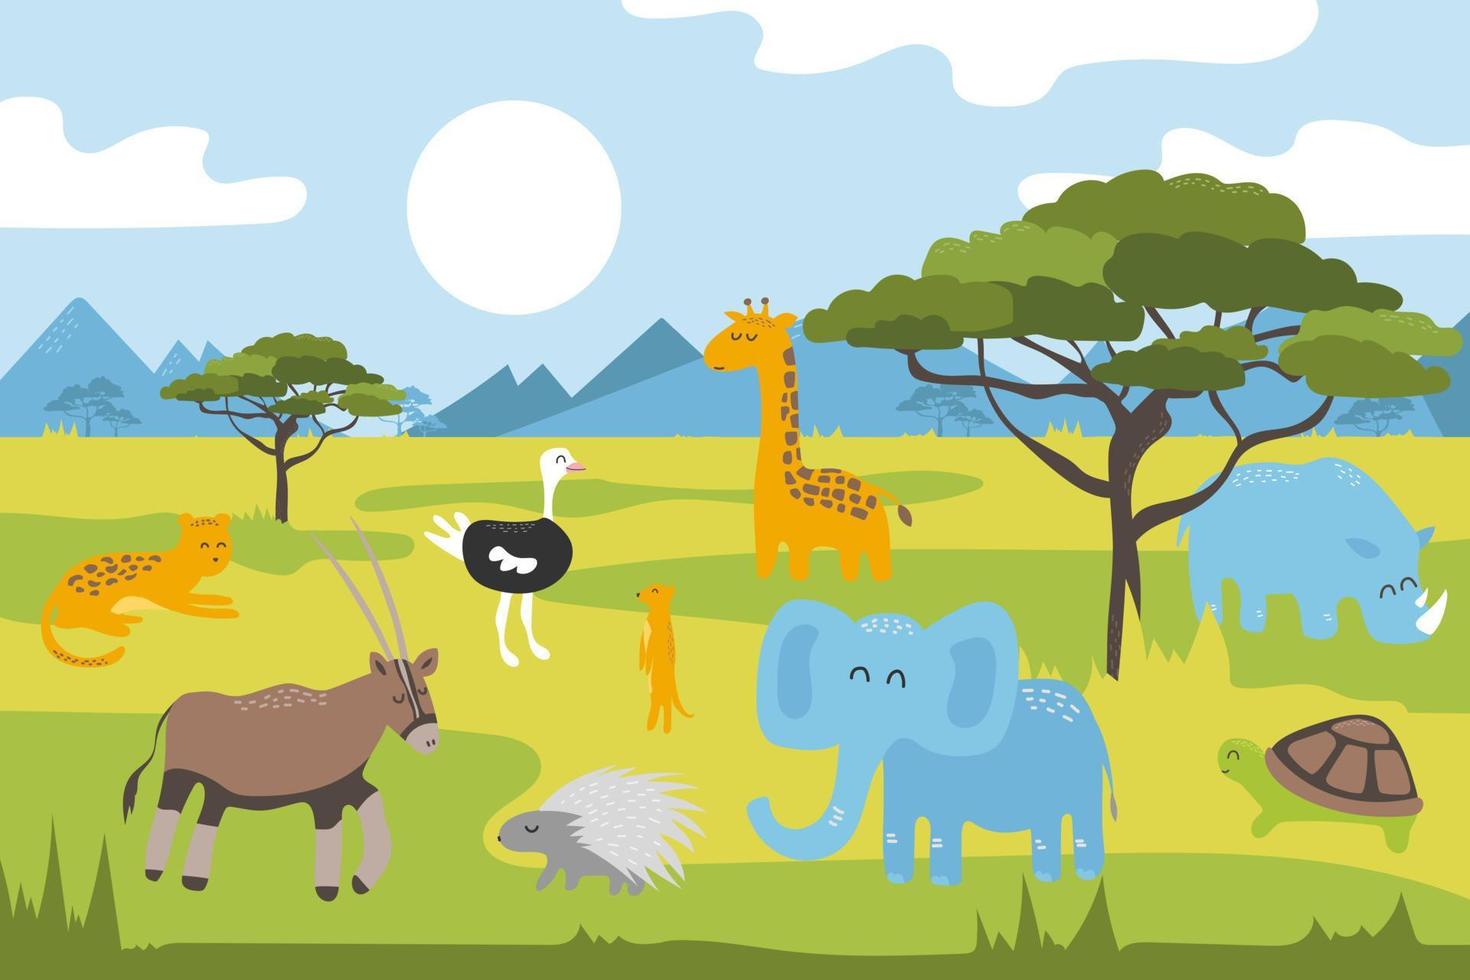 Cartoon wild animals in the savannah. Cartoon panorama with acacia trees, mountains in the background. African animals vector